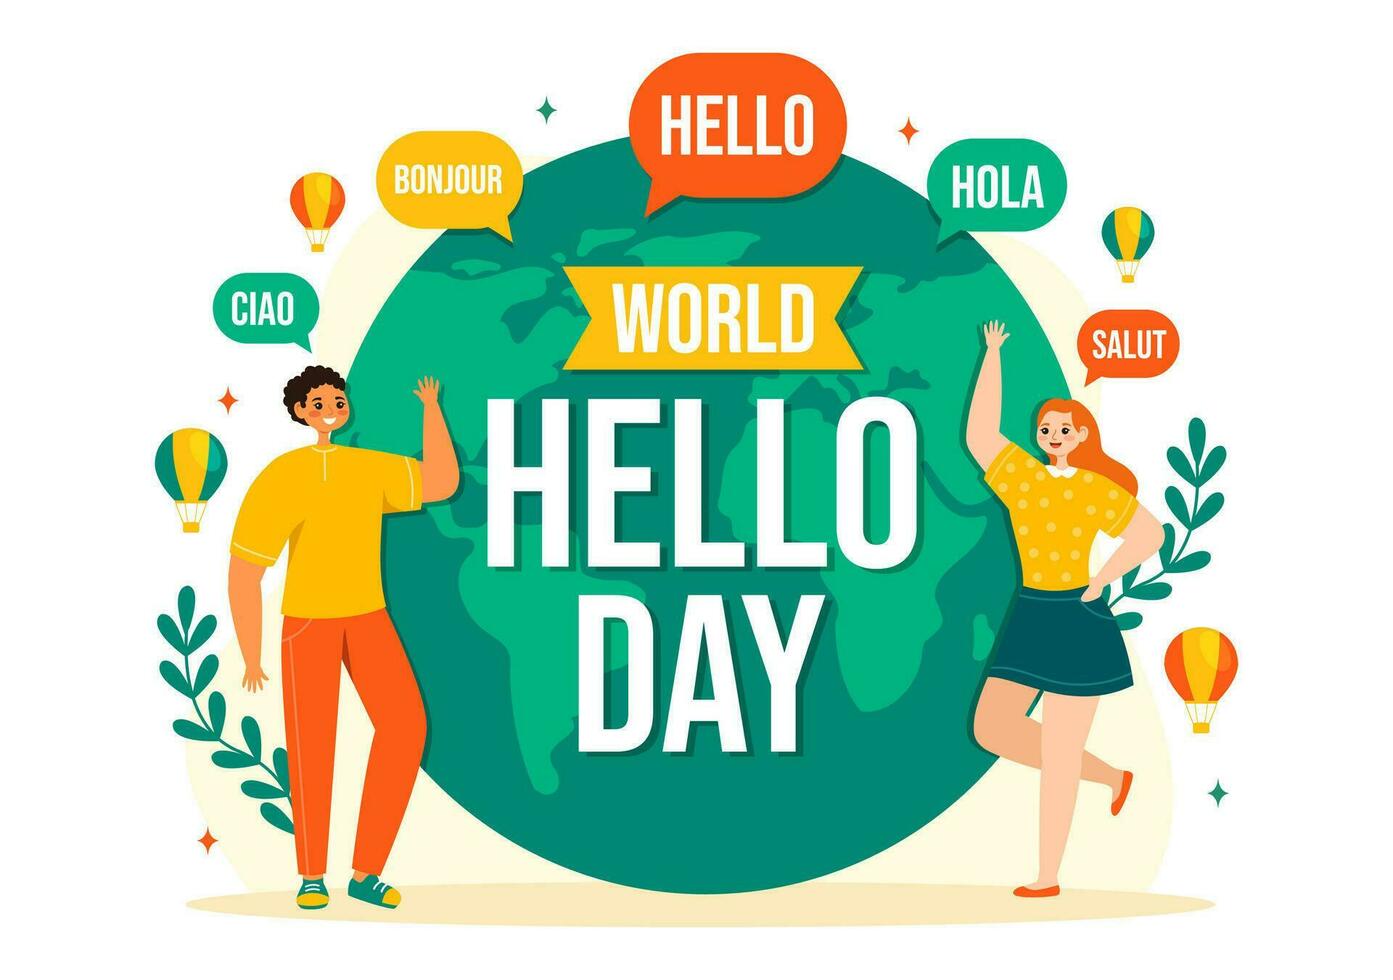 World Hello Day Vector Illustration on November 21 of Speech Bubbles with Different Languages from all over the Country in Flat Cartoon Background